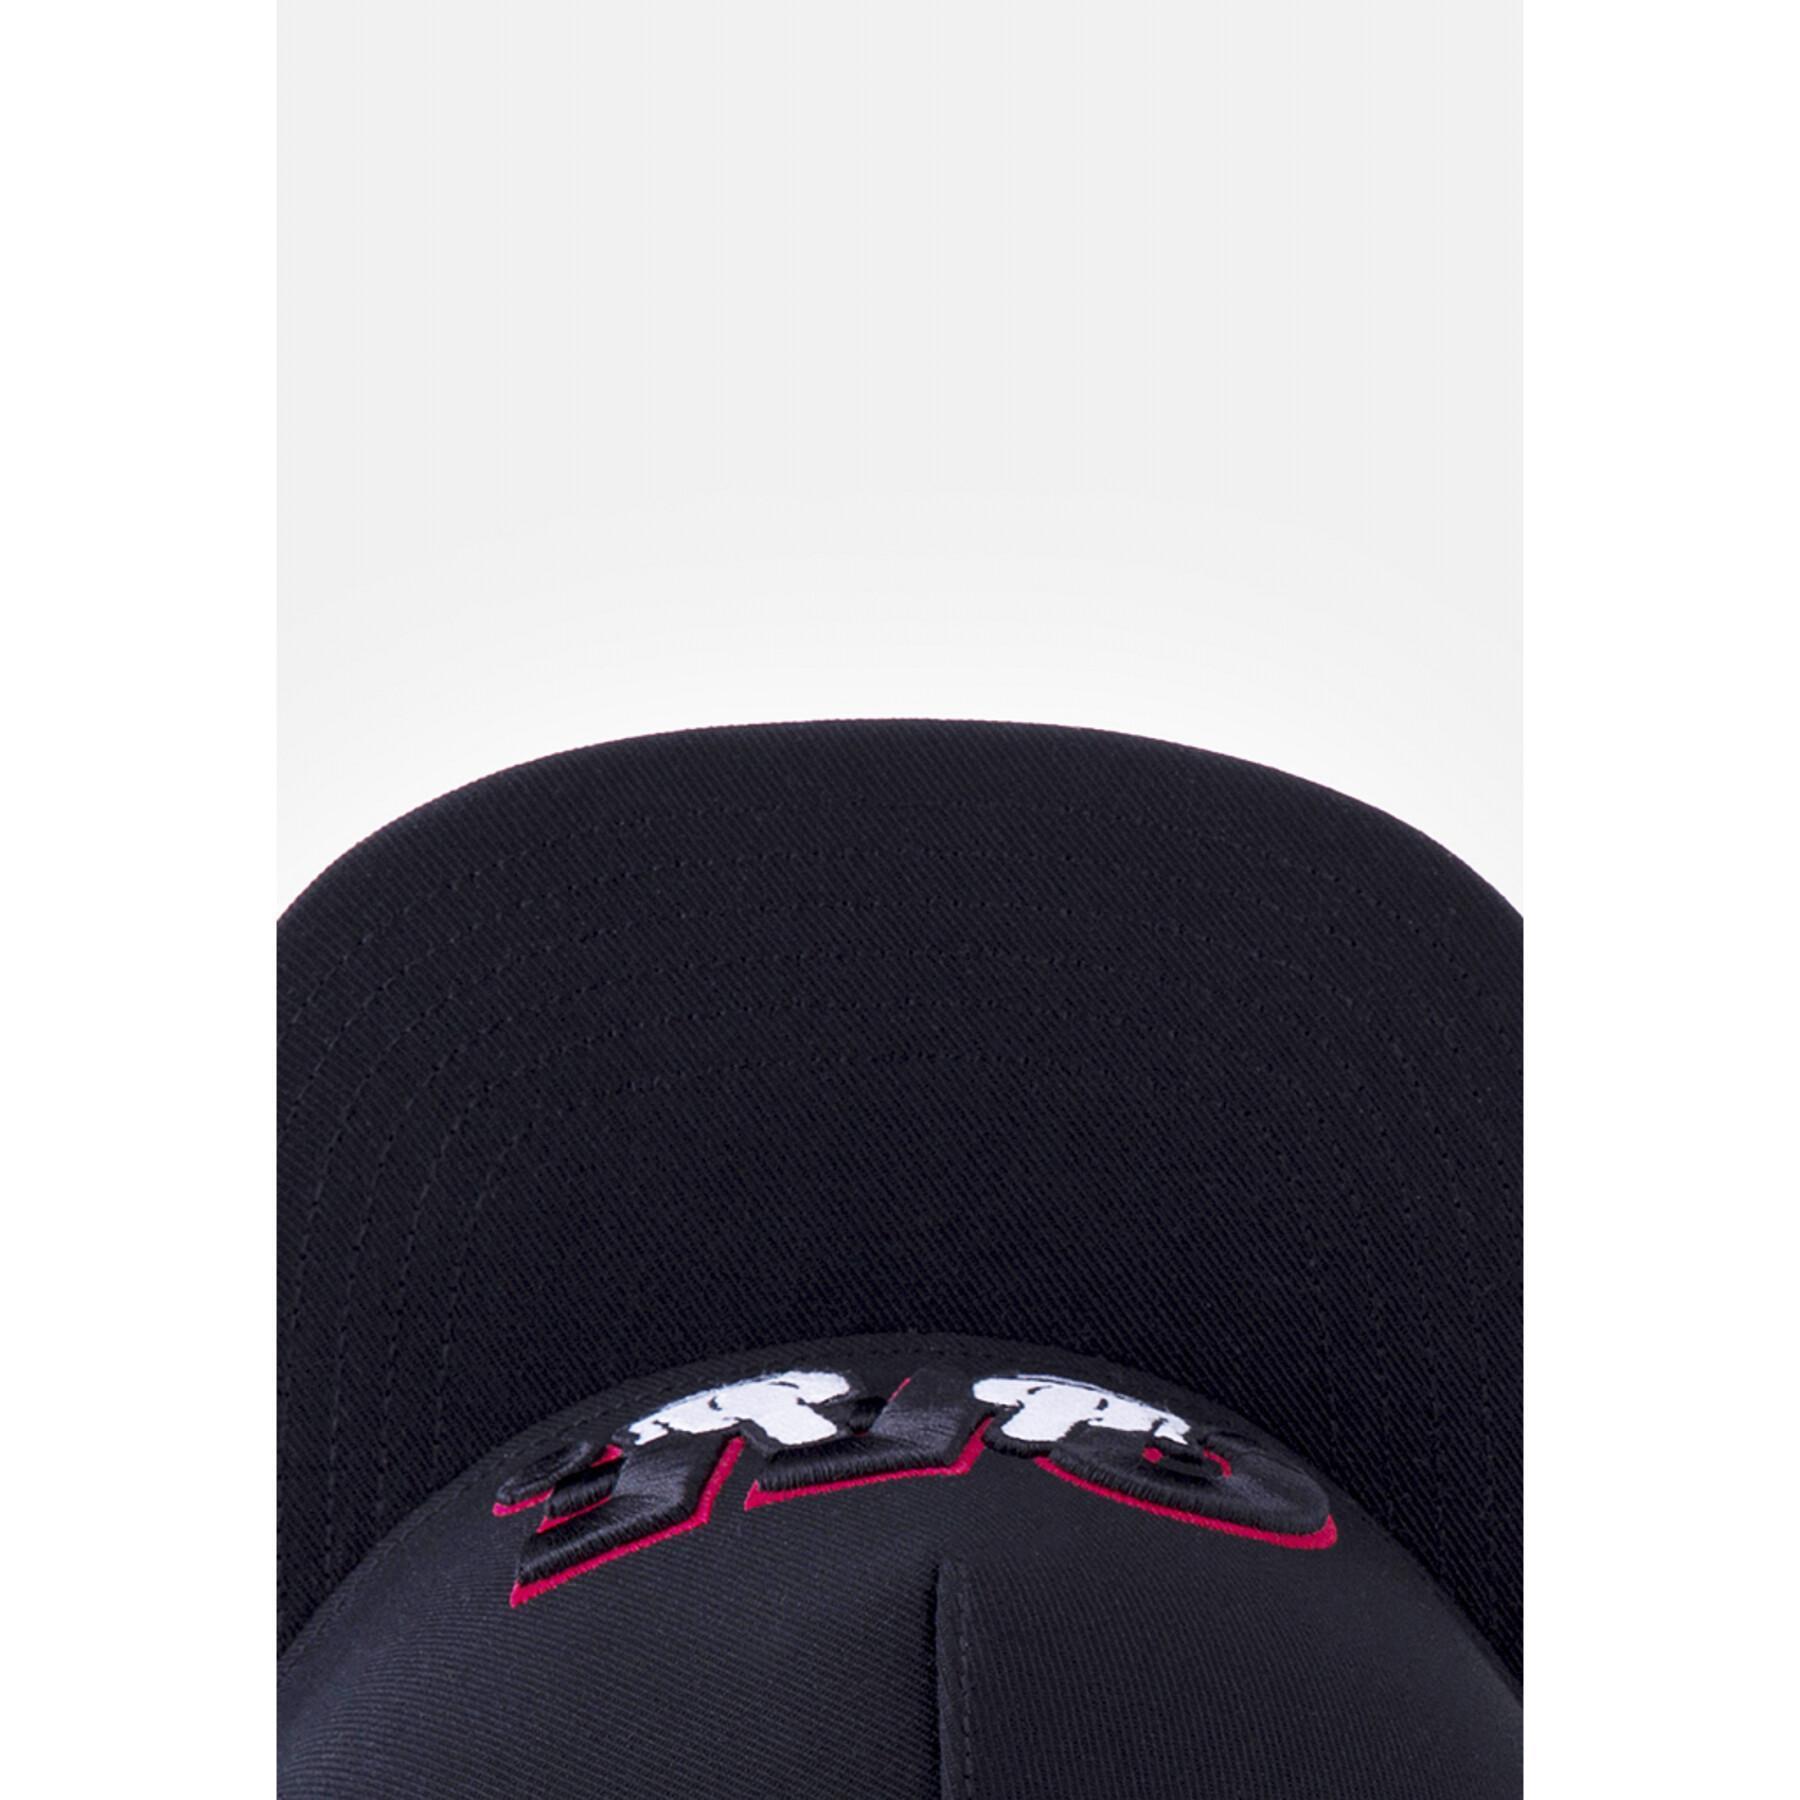 Gorra Cayler&Sons Eriouly